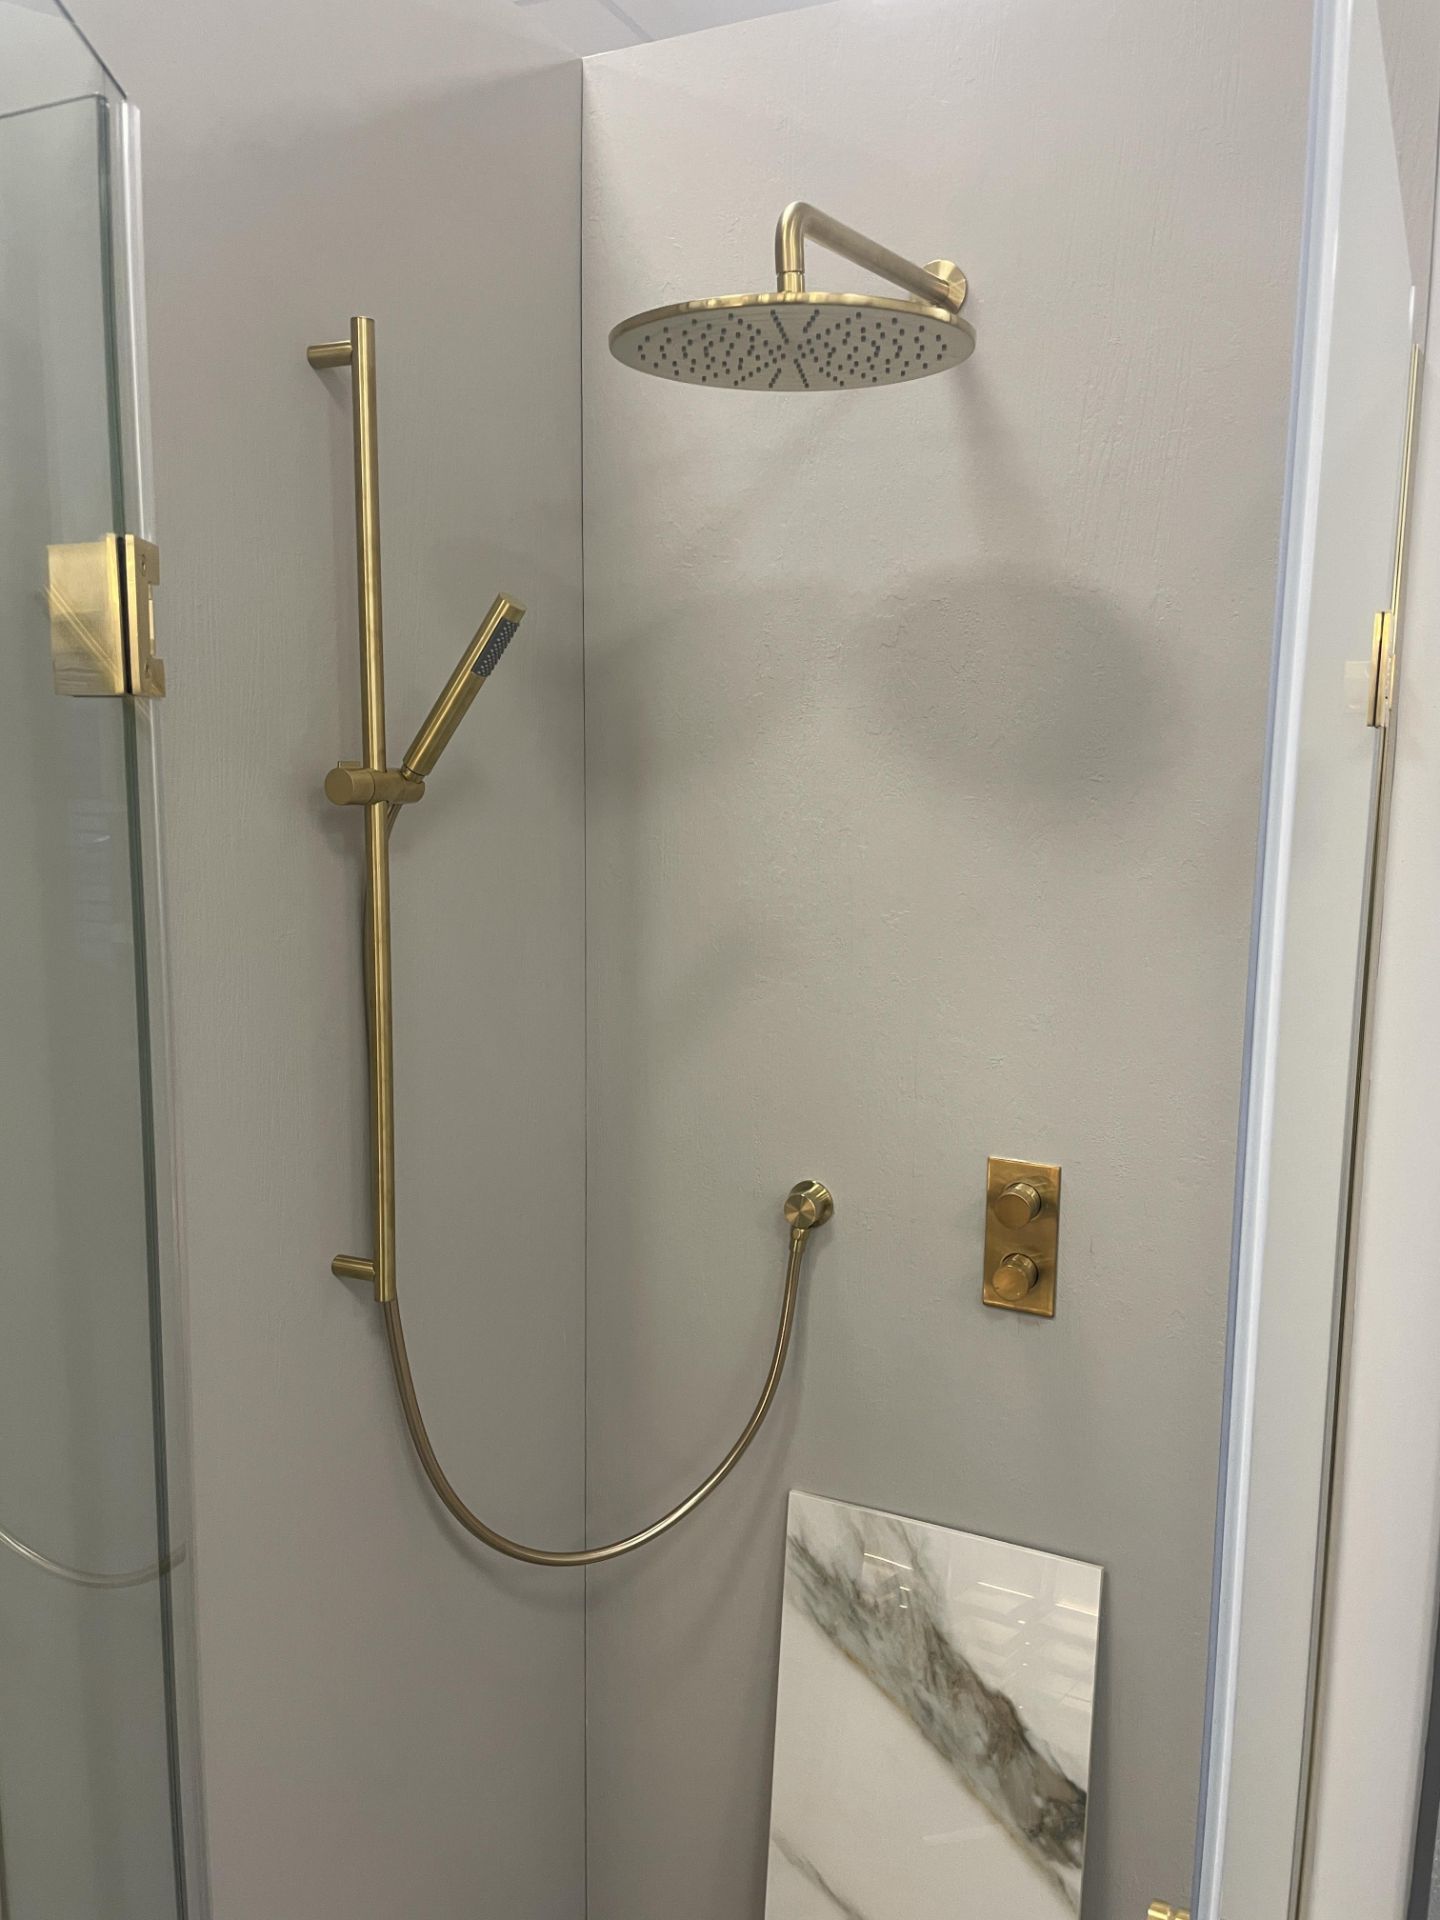 Twin Door Shower Enclosure, approx. 900mm x 900mm, with wall mounted showerhead, flexible showerhead - Image 2 of 3